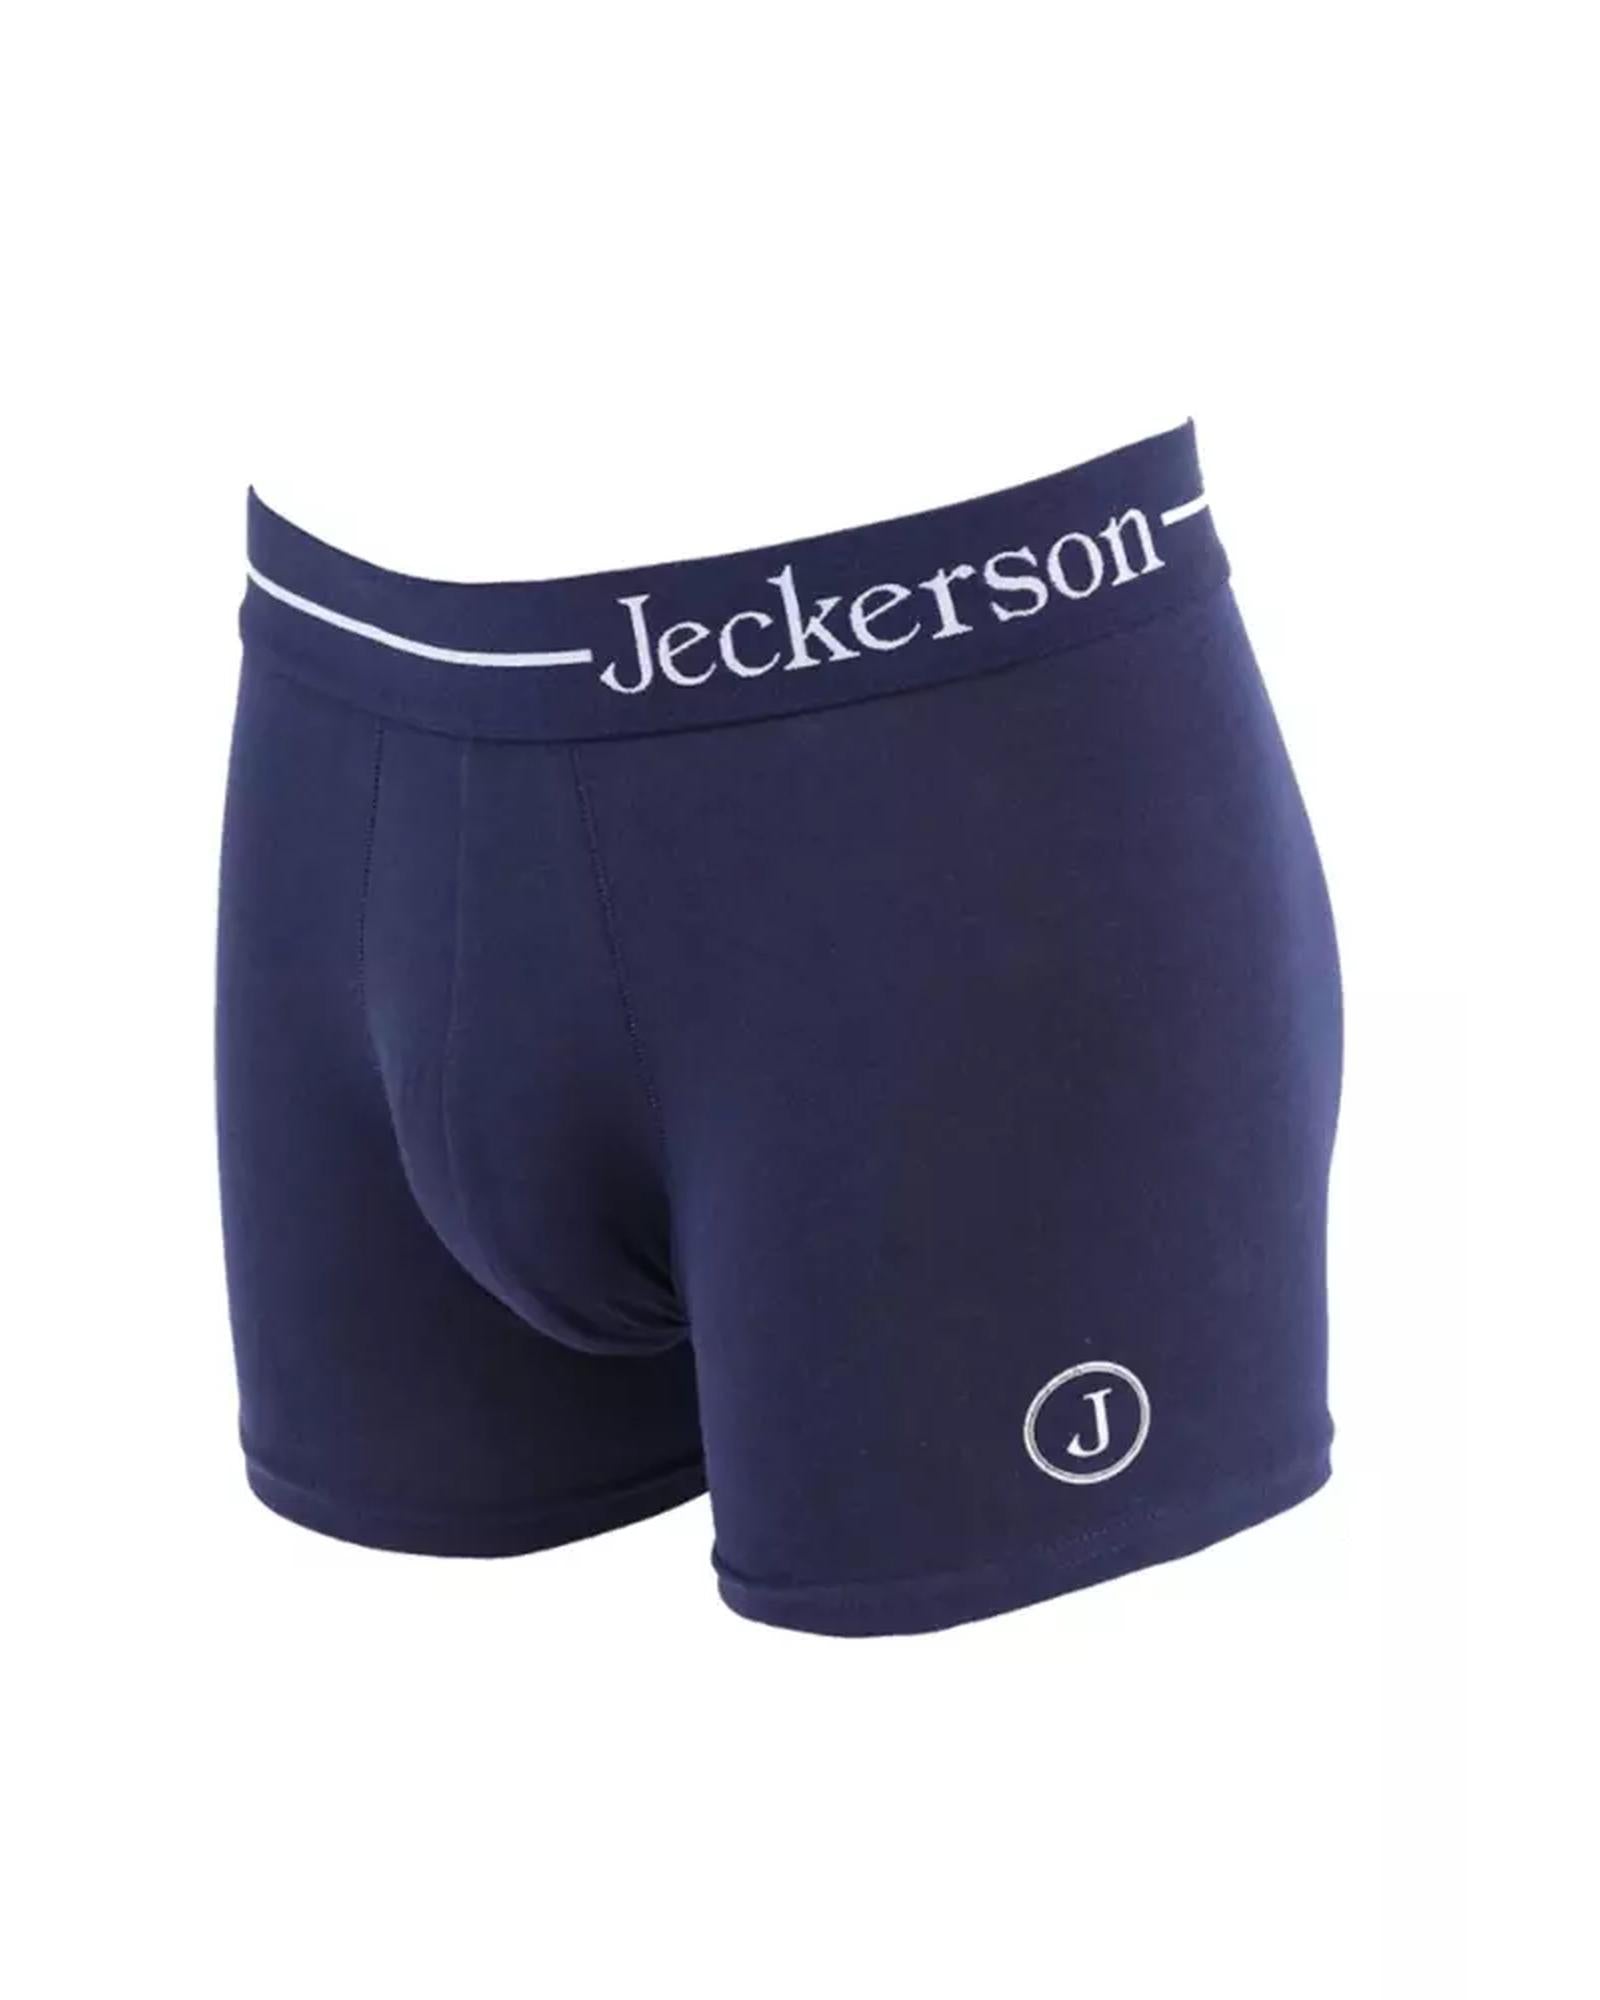 Monochrome Boxer with Logo Print and Branded Elastic Band M Men